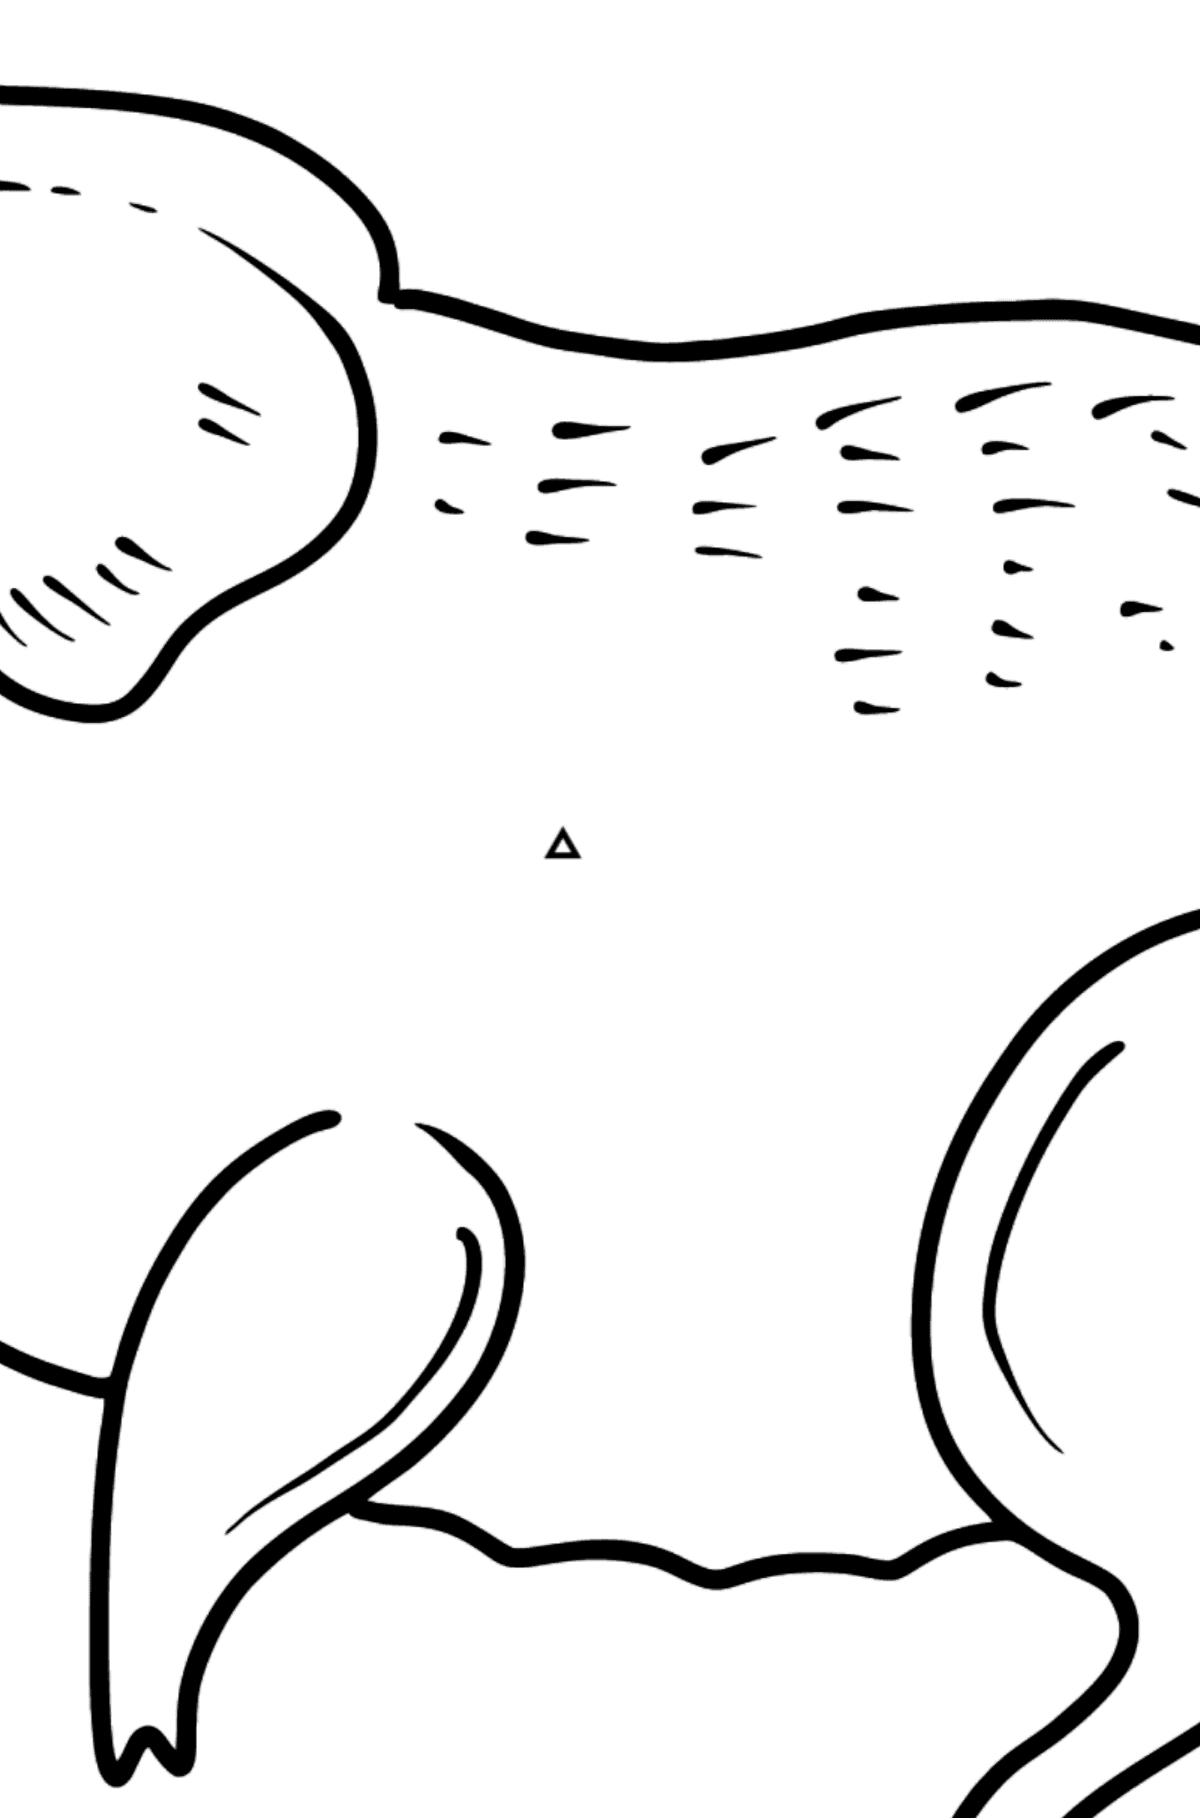 Pig coloring page - Coloring by Symbols for Kids